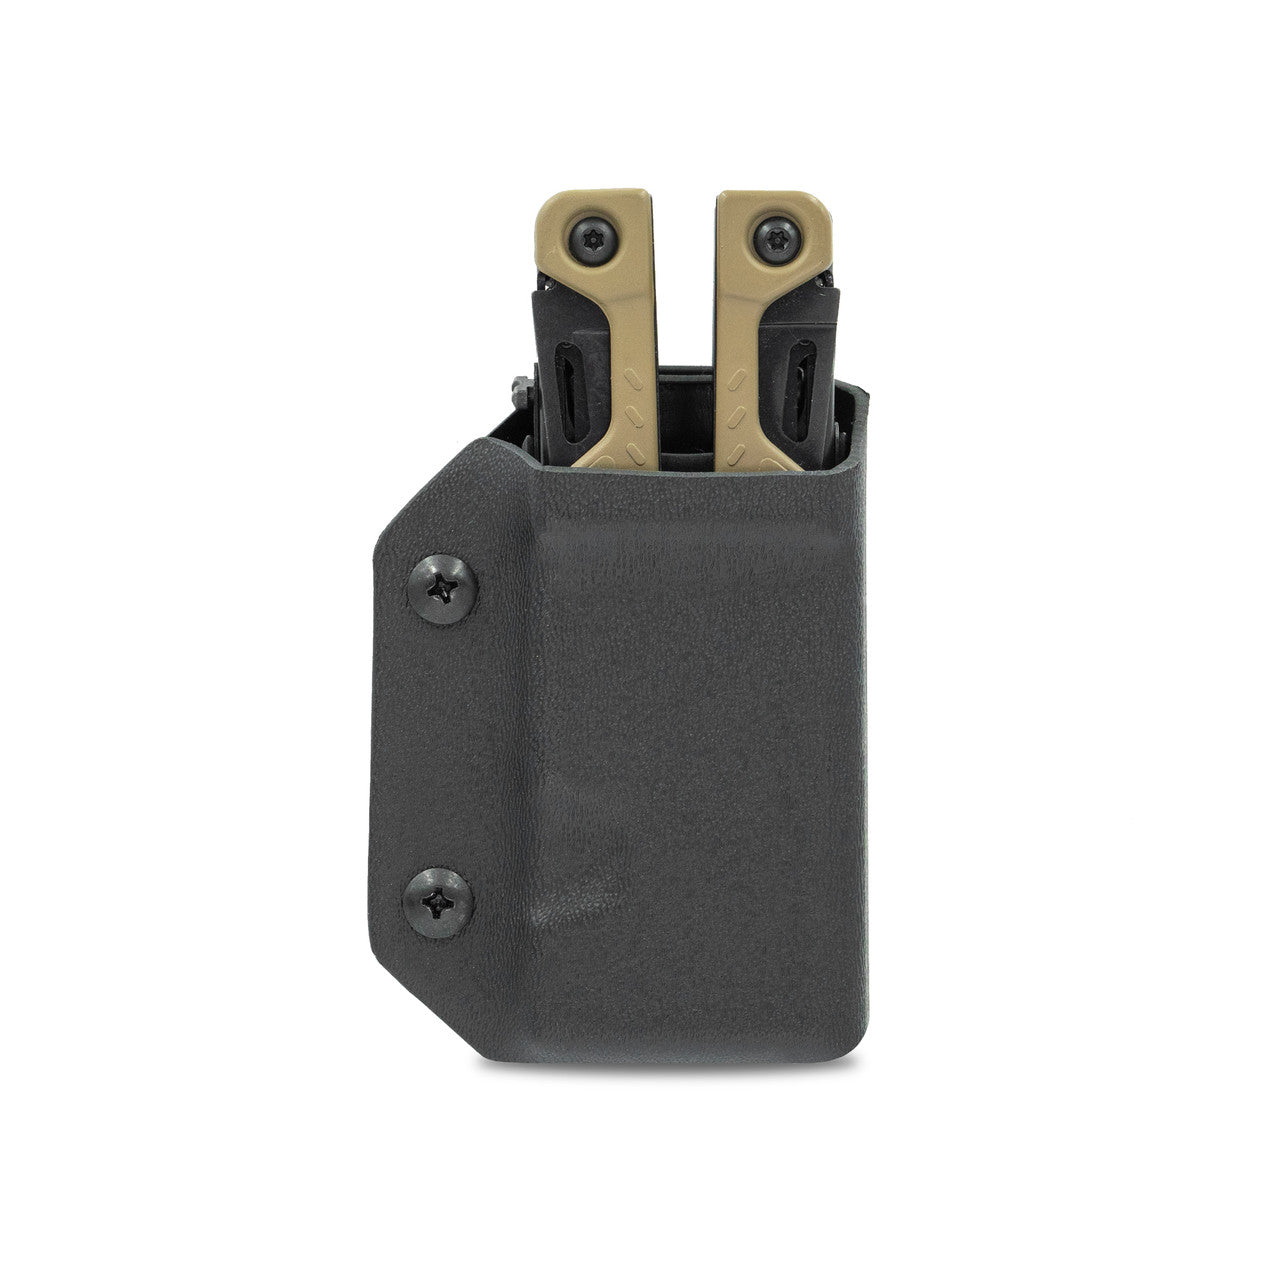 Kydex Sheath for Leatherman OHT Clip & Carry